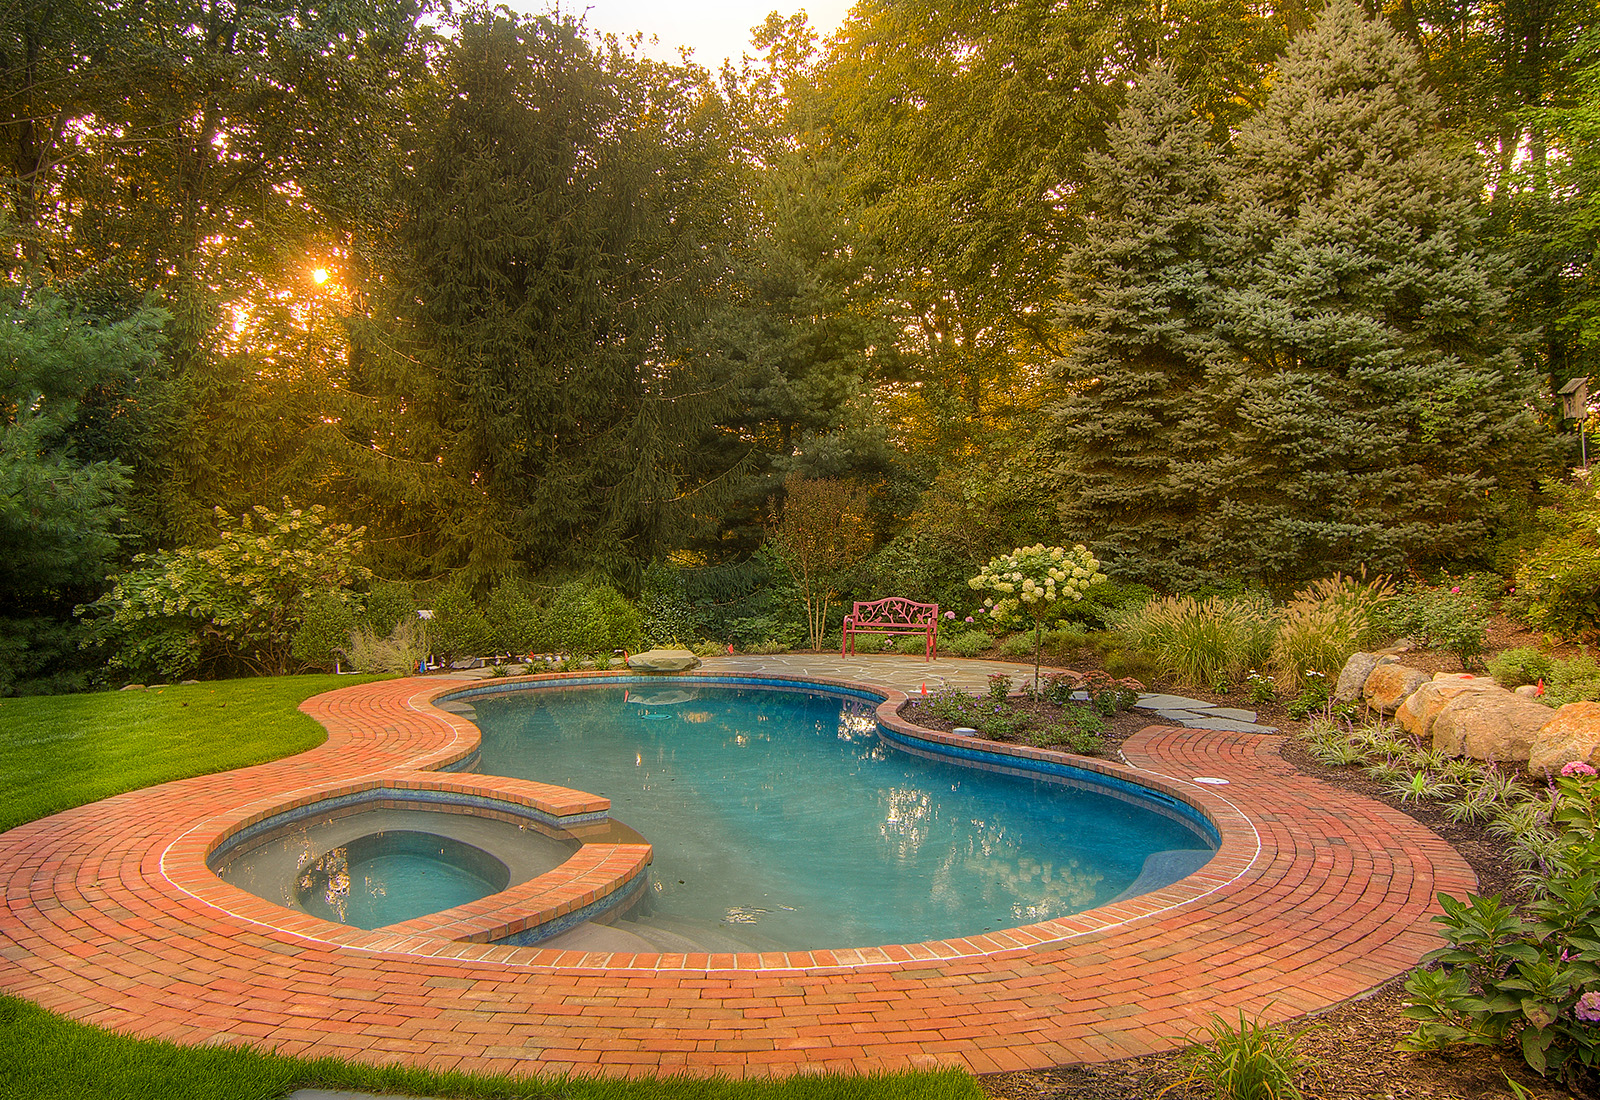 Gunite pool and spa with a brick patio.